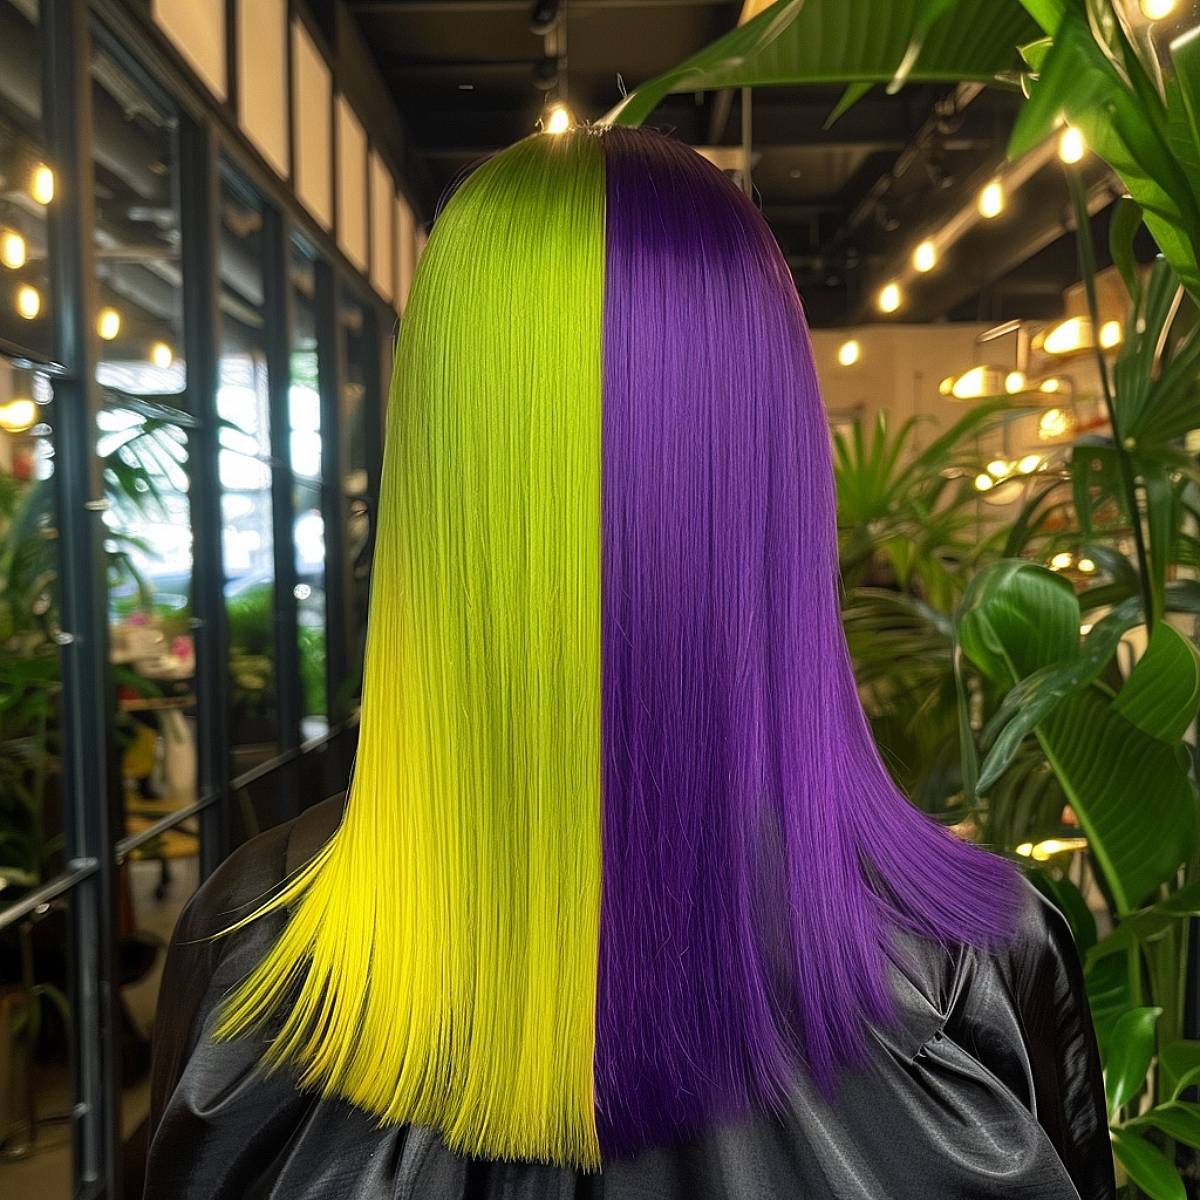 Sleek, straight hair with a Gemini-inspired transition from vibrant green to royal purple.